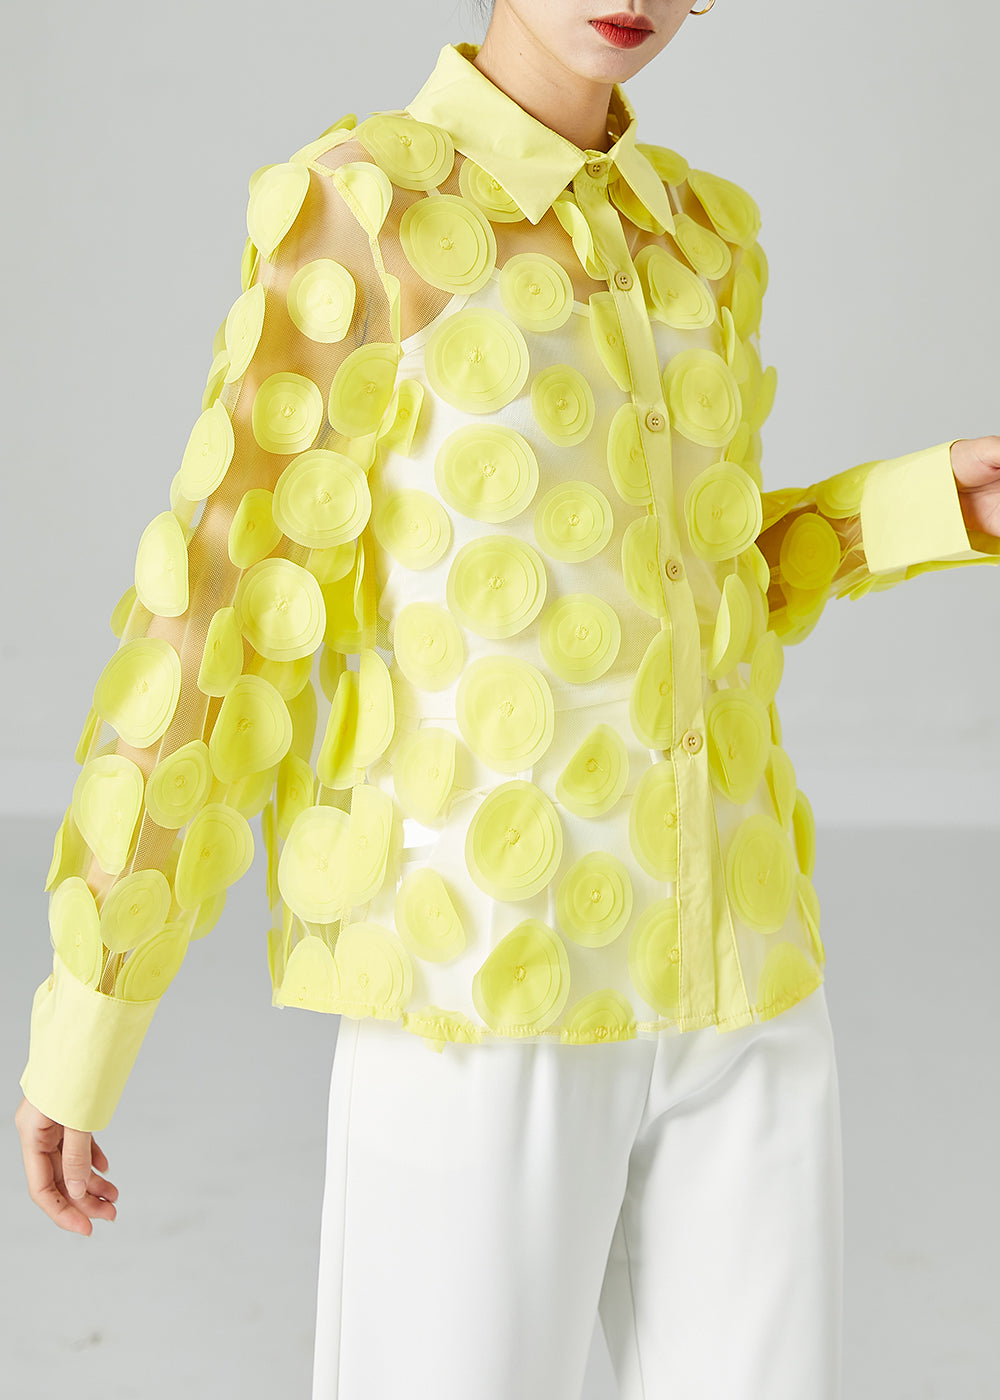 Simple Yellow Peter Pan Collar Hollow Out Tulle Blouse Tops Summer